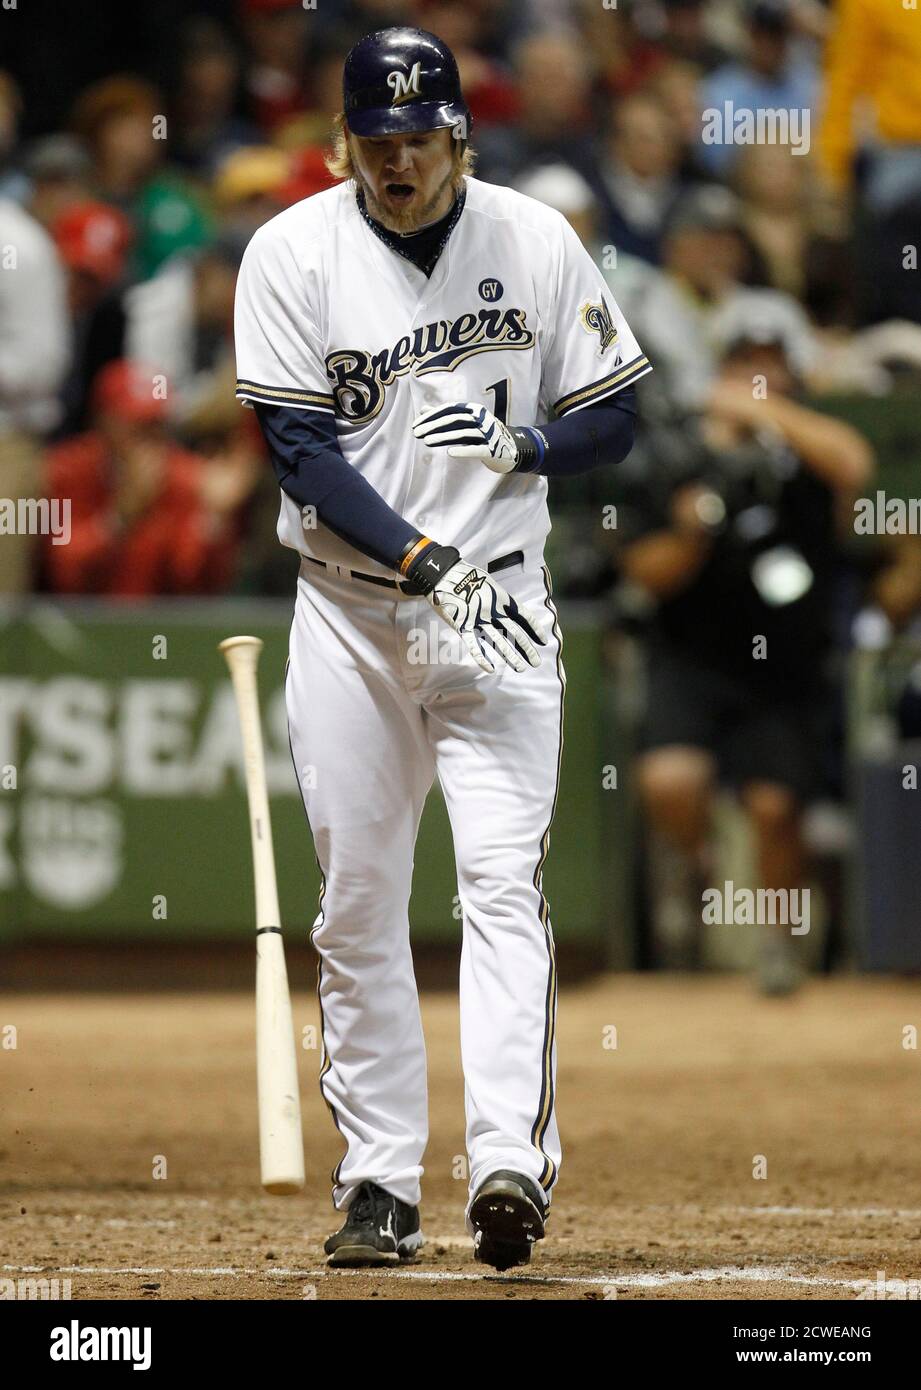 Milwaukee Brewers' Corey Hart tosses his bat after striking out against the  St. Louis Cardinals to end the 4th inning in Game 6 of the MLB NLCS  baseball playoffs in Milwaukee, Wisconsin,